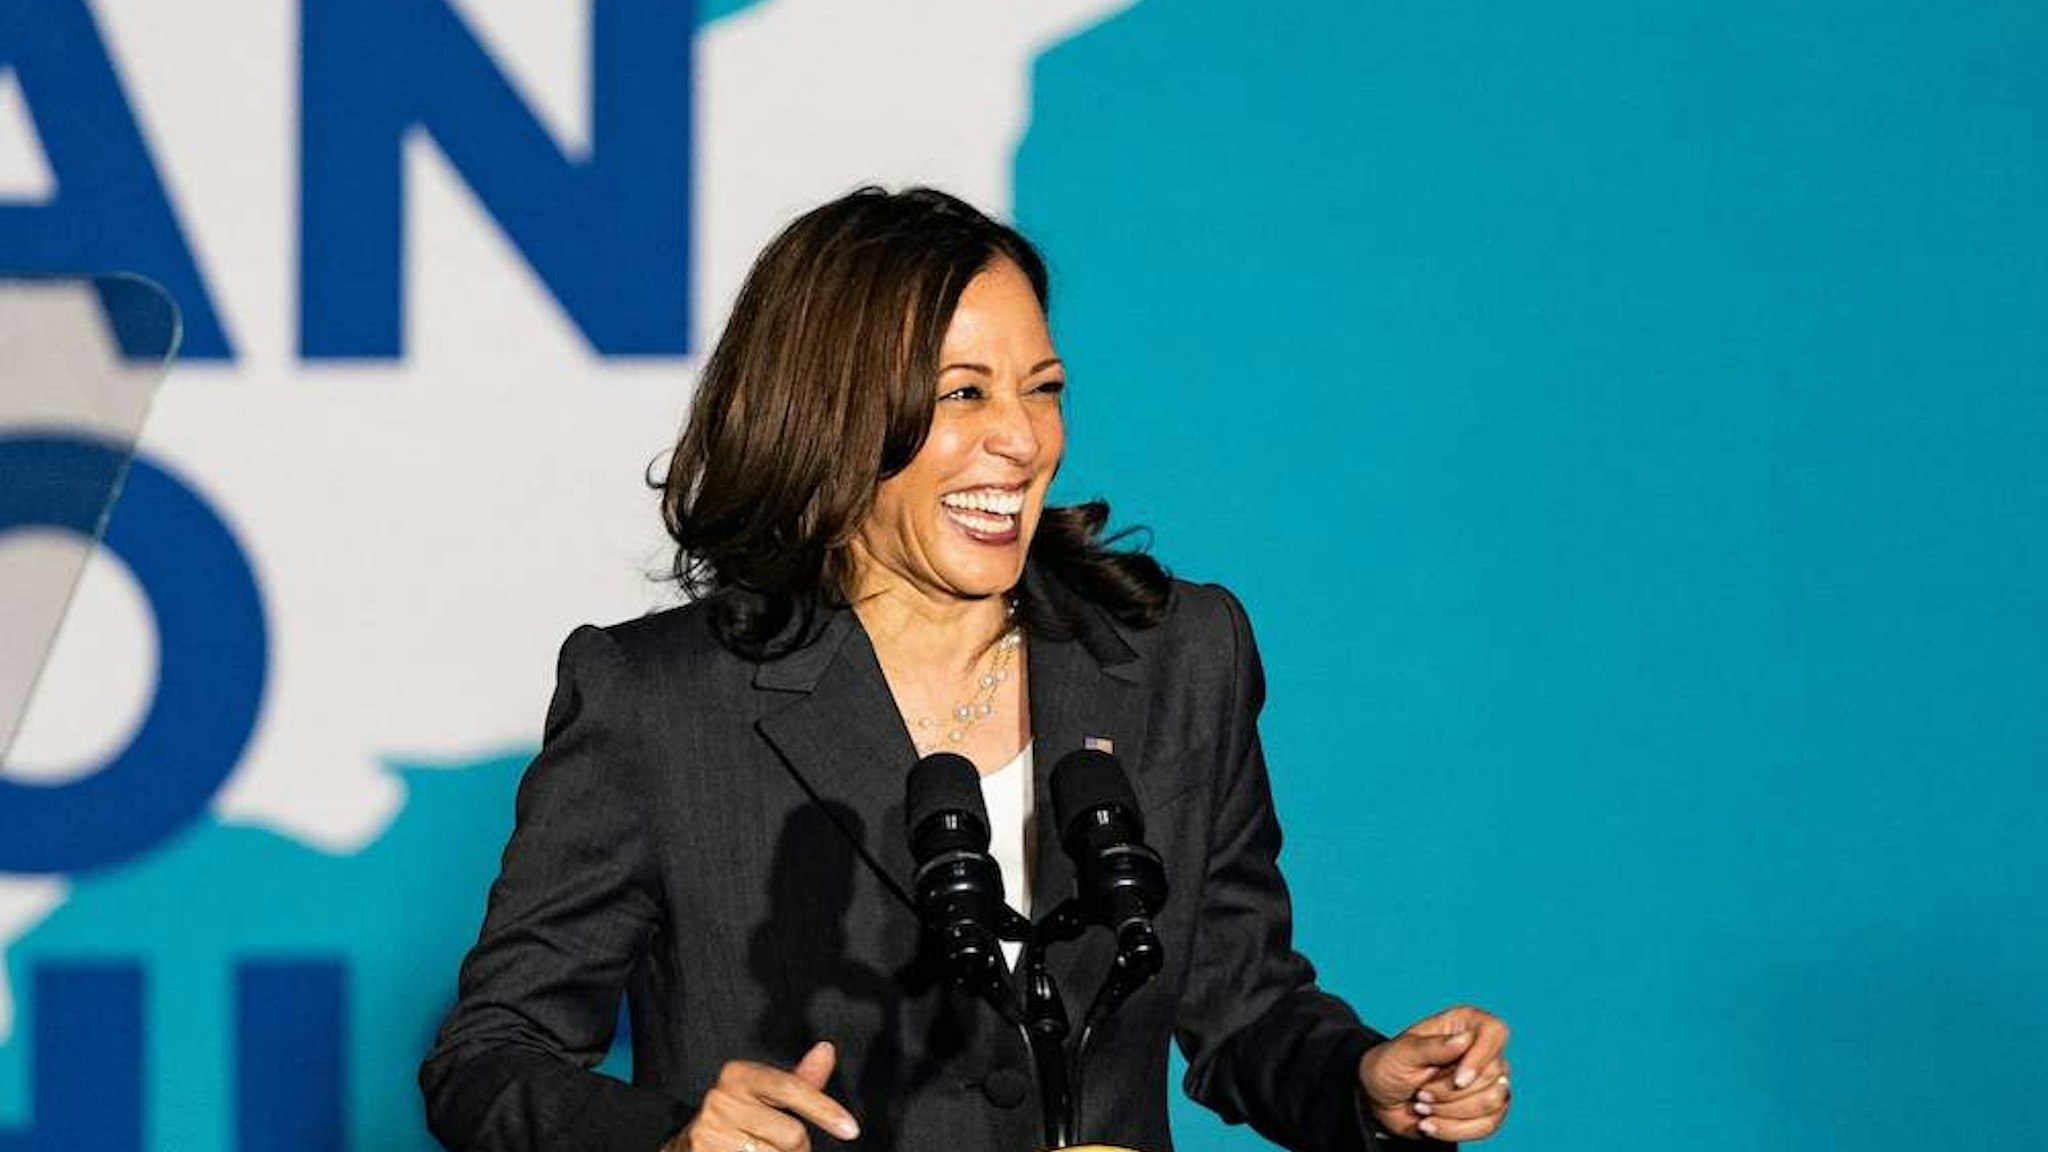 US Vice President Kamala Harris reacts to cheers as she arrives to deliver remarks at a Covid-19 vaccination mobilization event at Clark Atlanta University in Atlanta, Georgia on June 18, 2021. - Harris is in Atlanta to attend Covid-19 vaccination events and a voting rights conversation with community leaders. (Photo by ALEX EDELMAN / AFP) (Photo by ALEX EDELMAN/AFP via Getty Images)